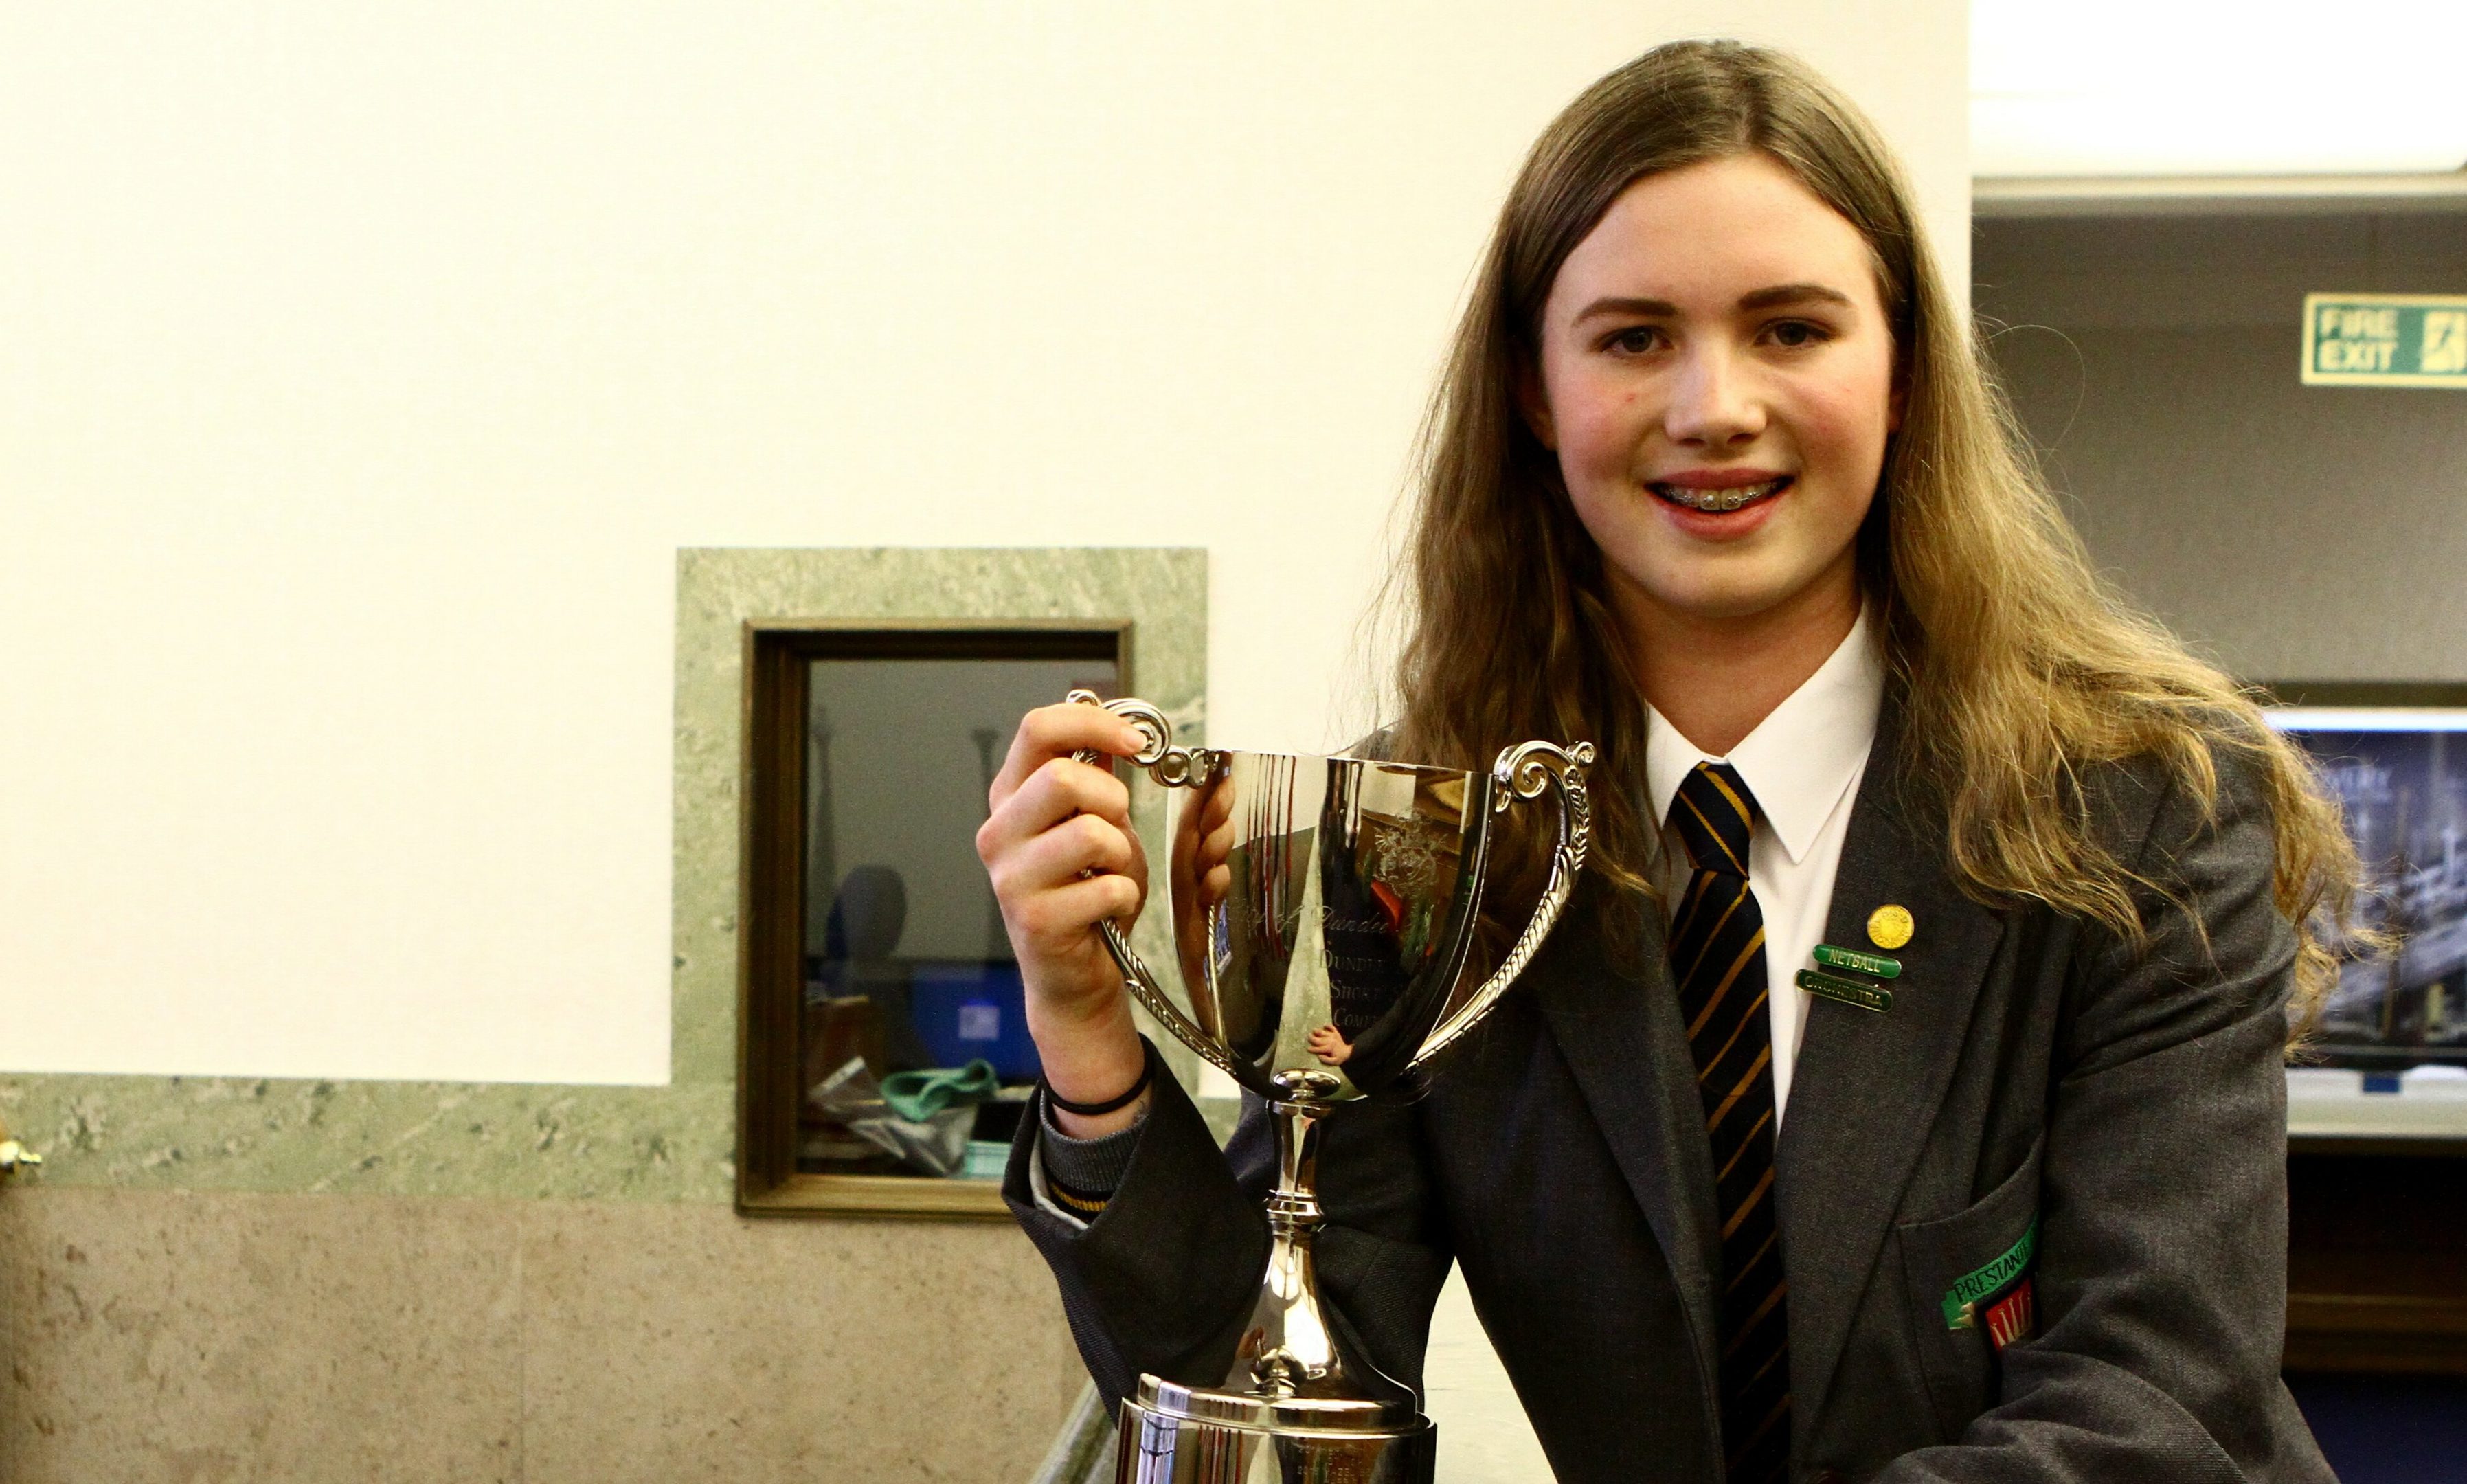 Winner of the Burgess Short Story Competition, Emily Baxter from Dundee High School, with her trophy at the City Chambers in Dundee.